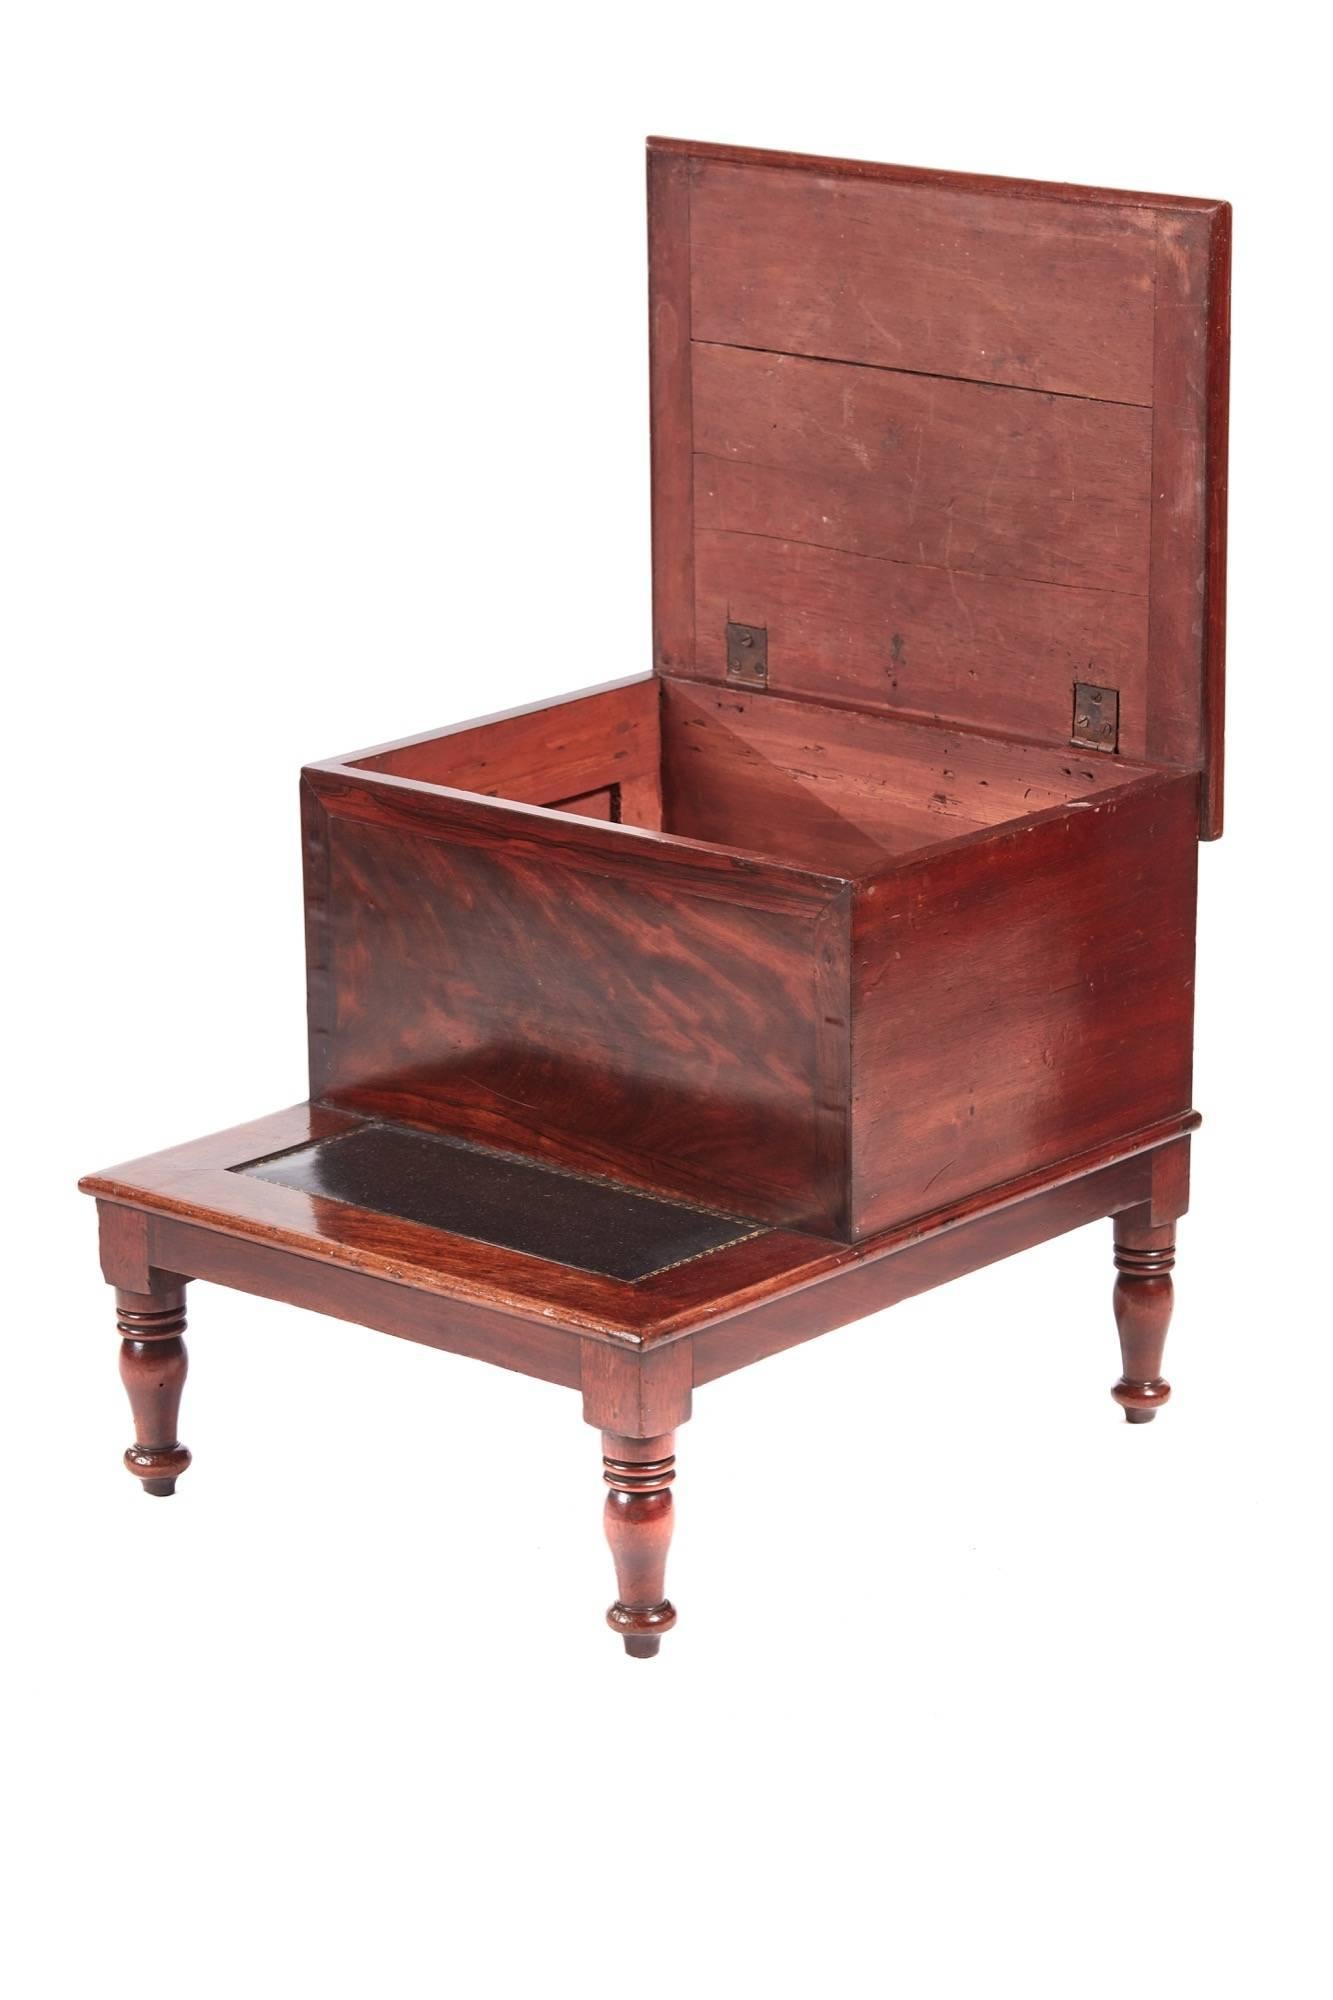 Georgian antique mahogany steps with inset black leather, lift up lid, standing on four solid mahogany turned legs.